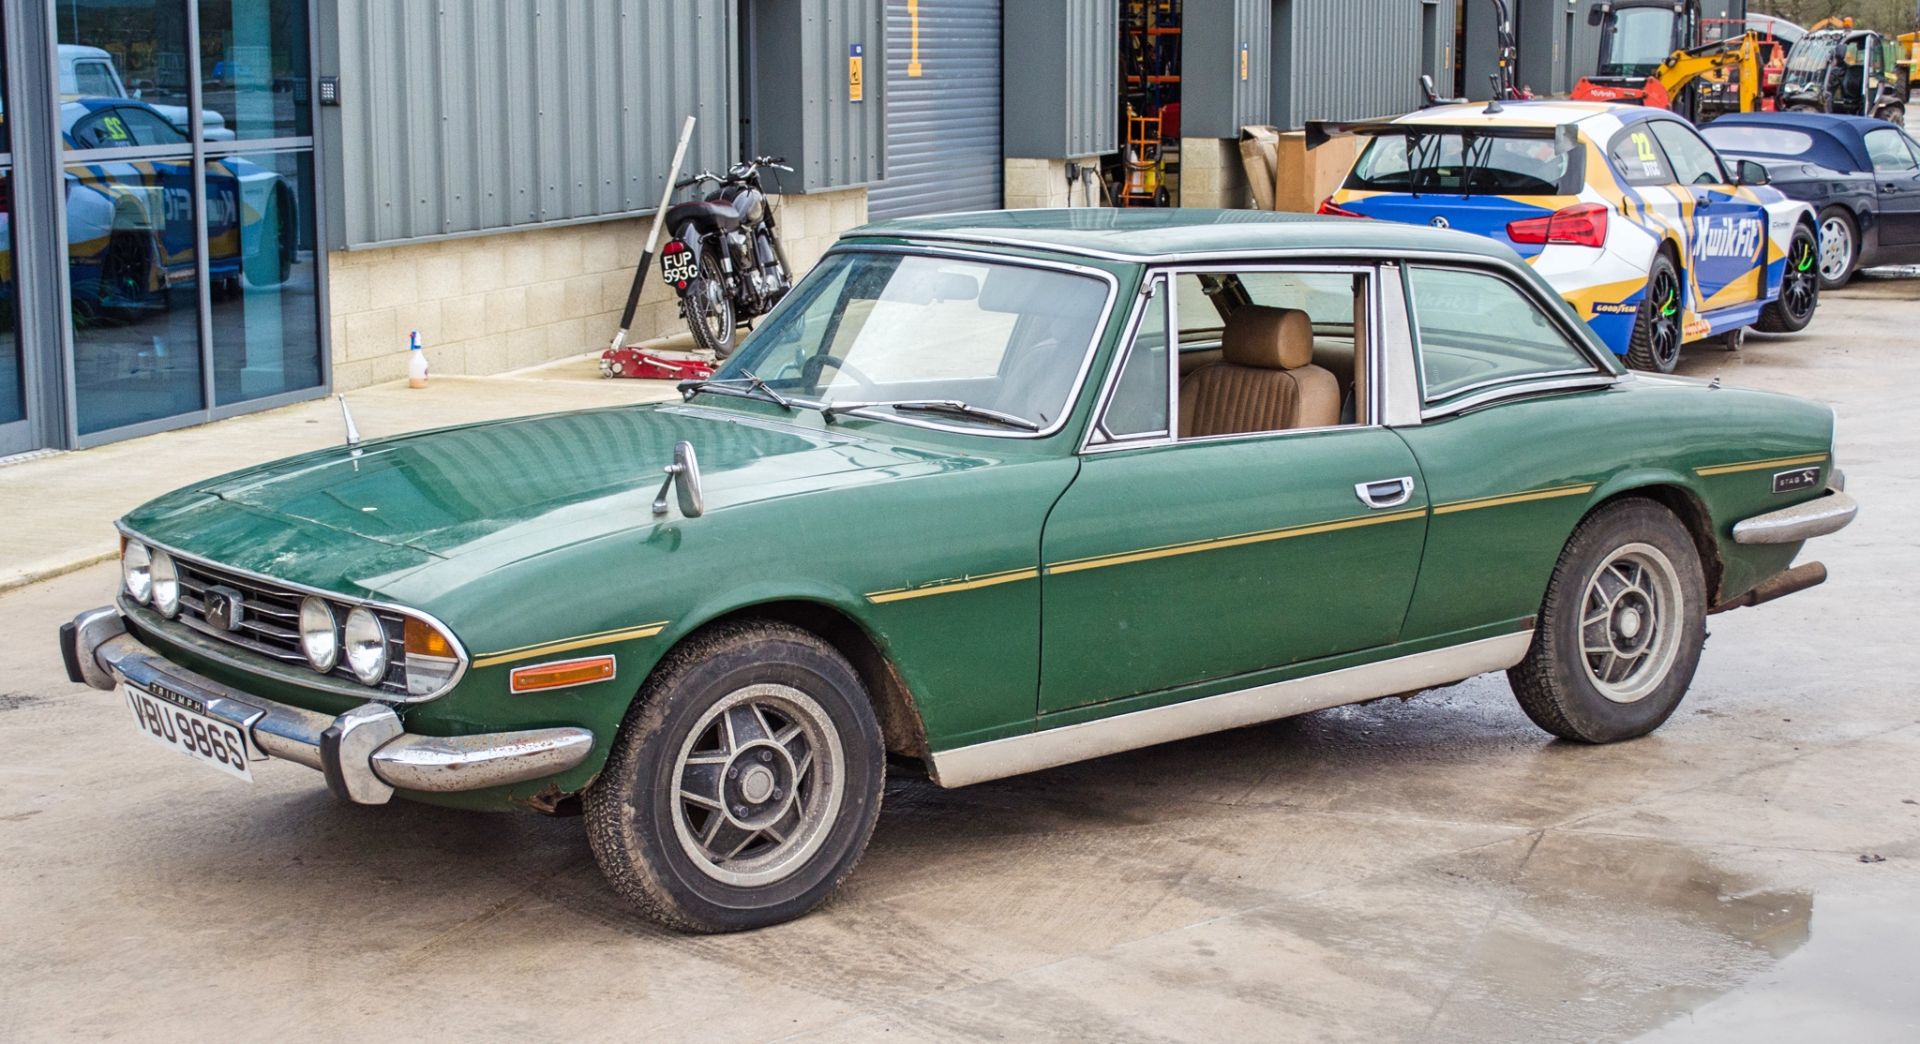 1978 Triumph Stag 3 litre manual 2 door convertible Barn Find - Image 4 of 57